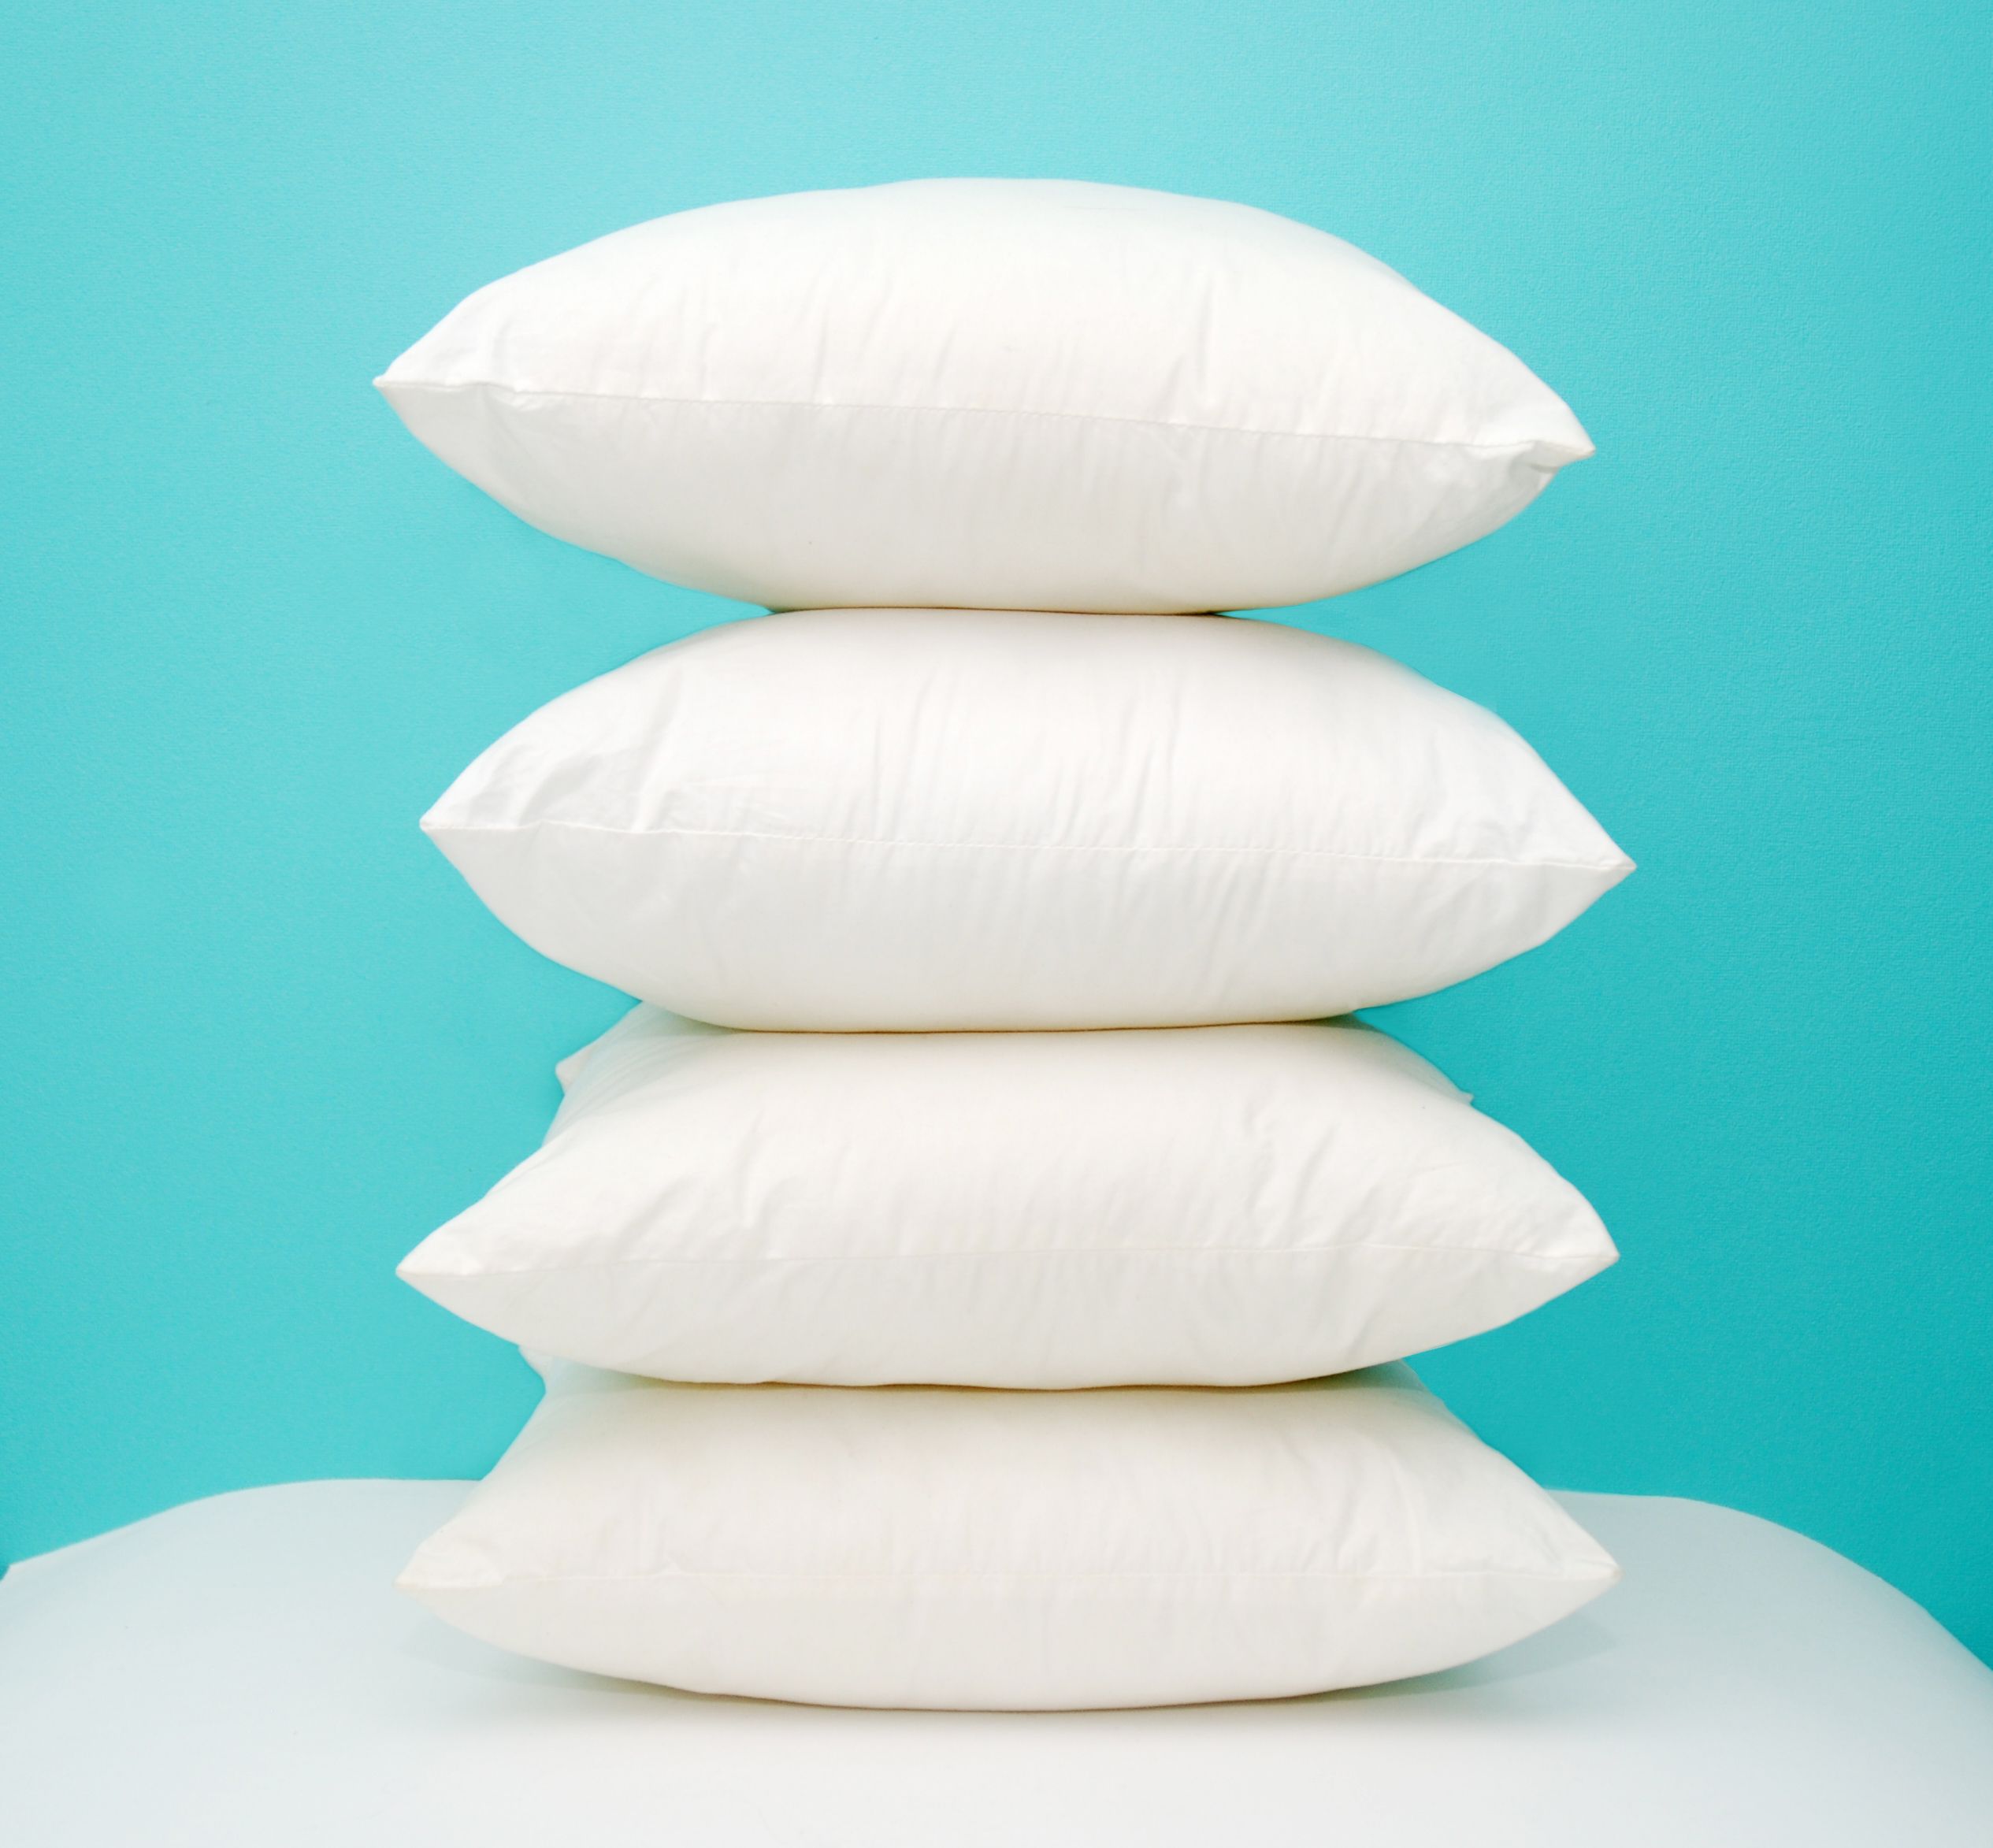 https://hips.hearstapps.com/hmg-prod/images/stack-of-four-pillows-royalty-free-image-1580922410.jpg